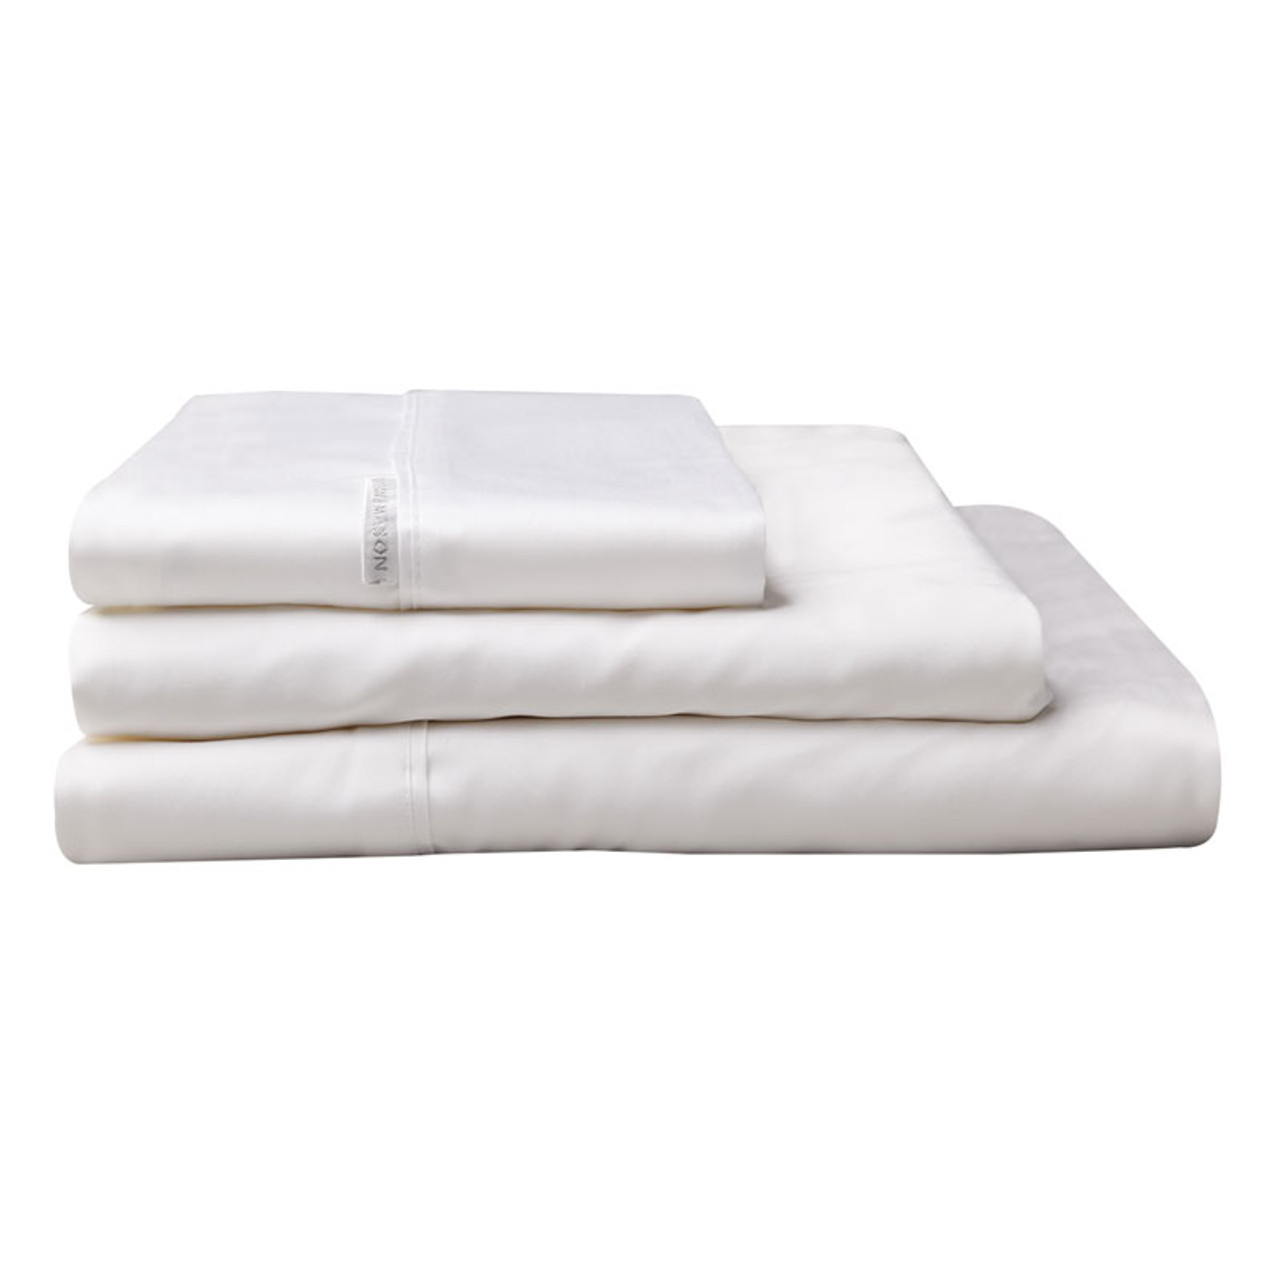 Beige, Double 100% Egyptian Cotton 40CM/16 Extra Deep Fitted Sheets Single Double King Super King Pillowcase Pair 